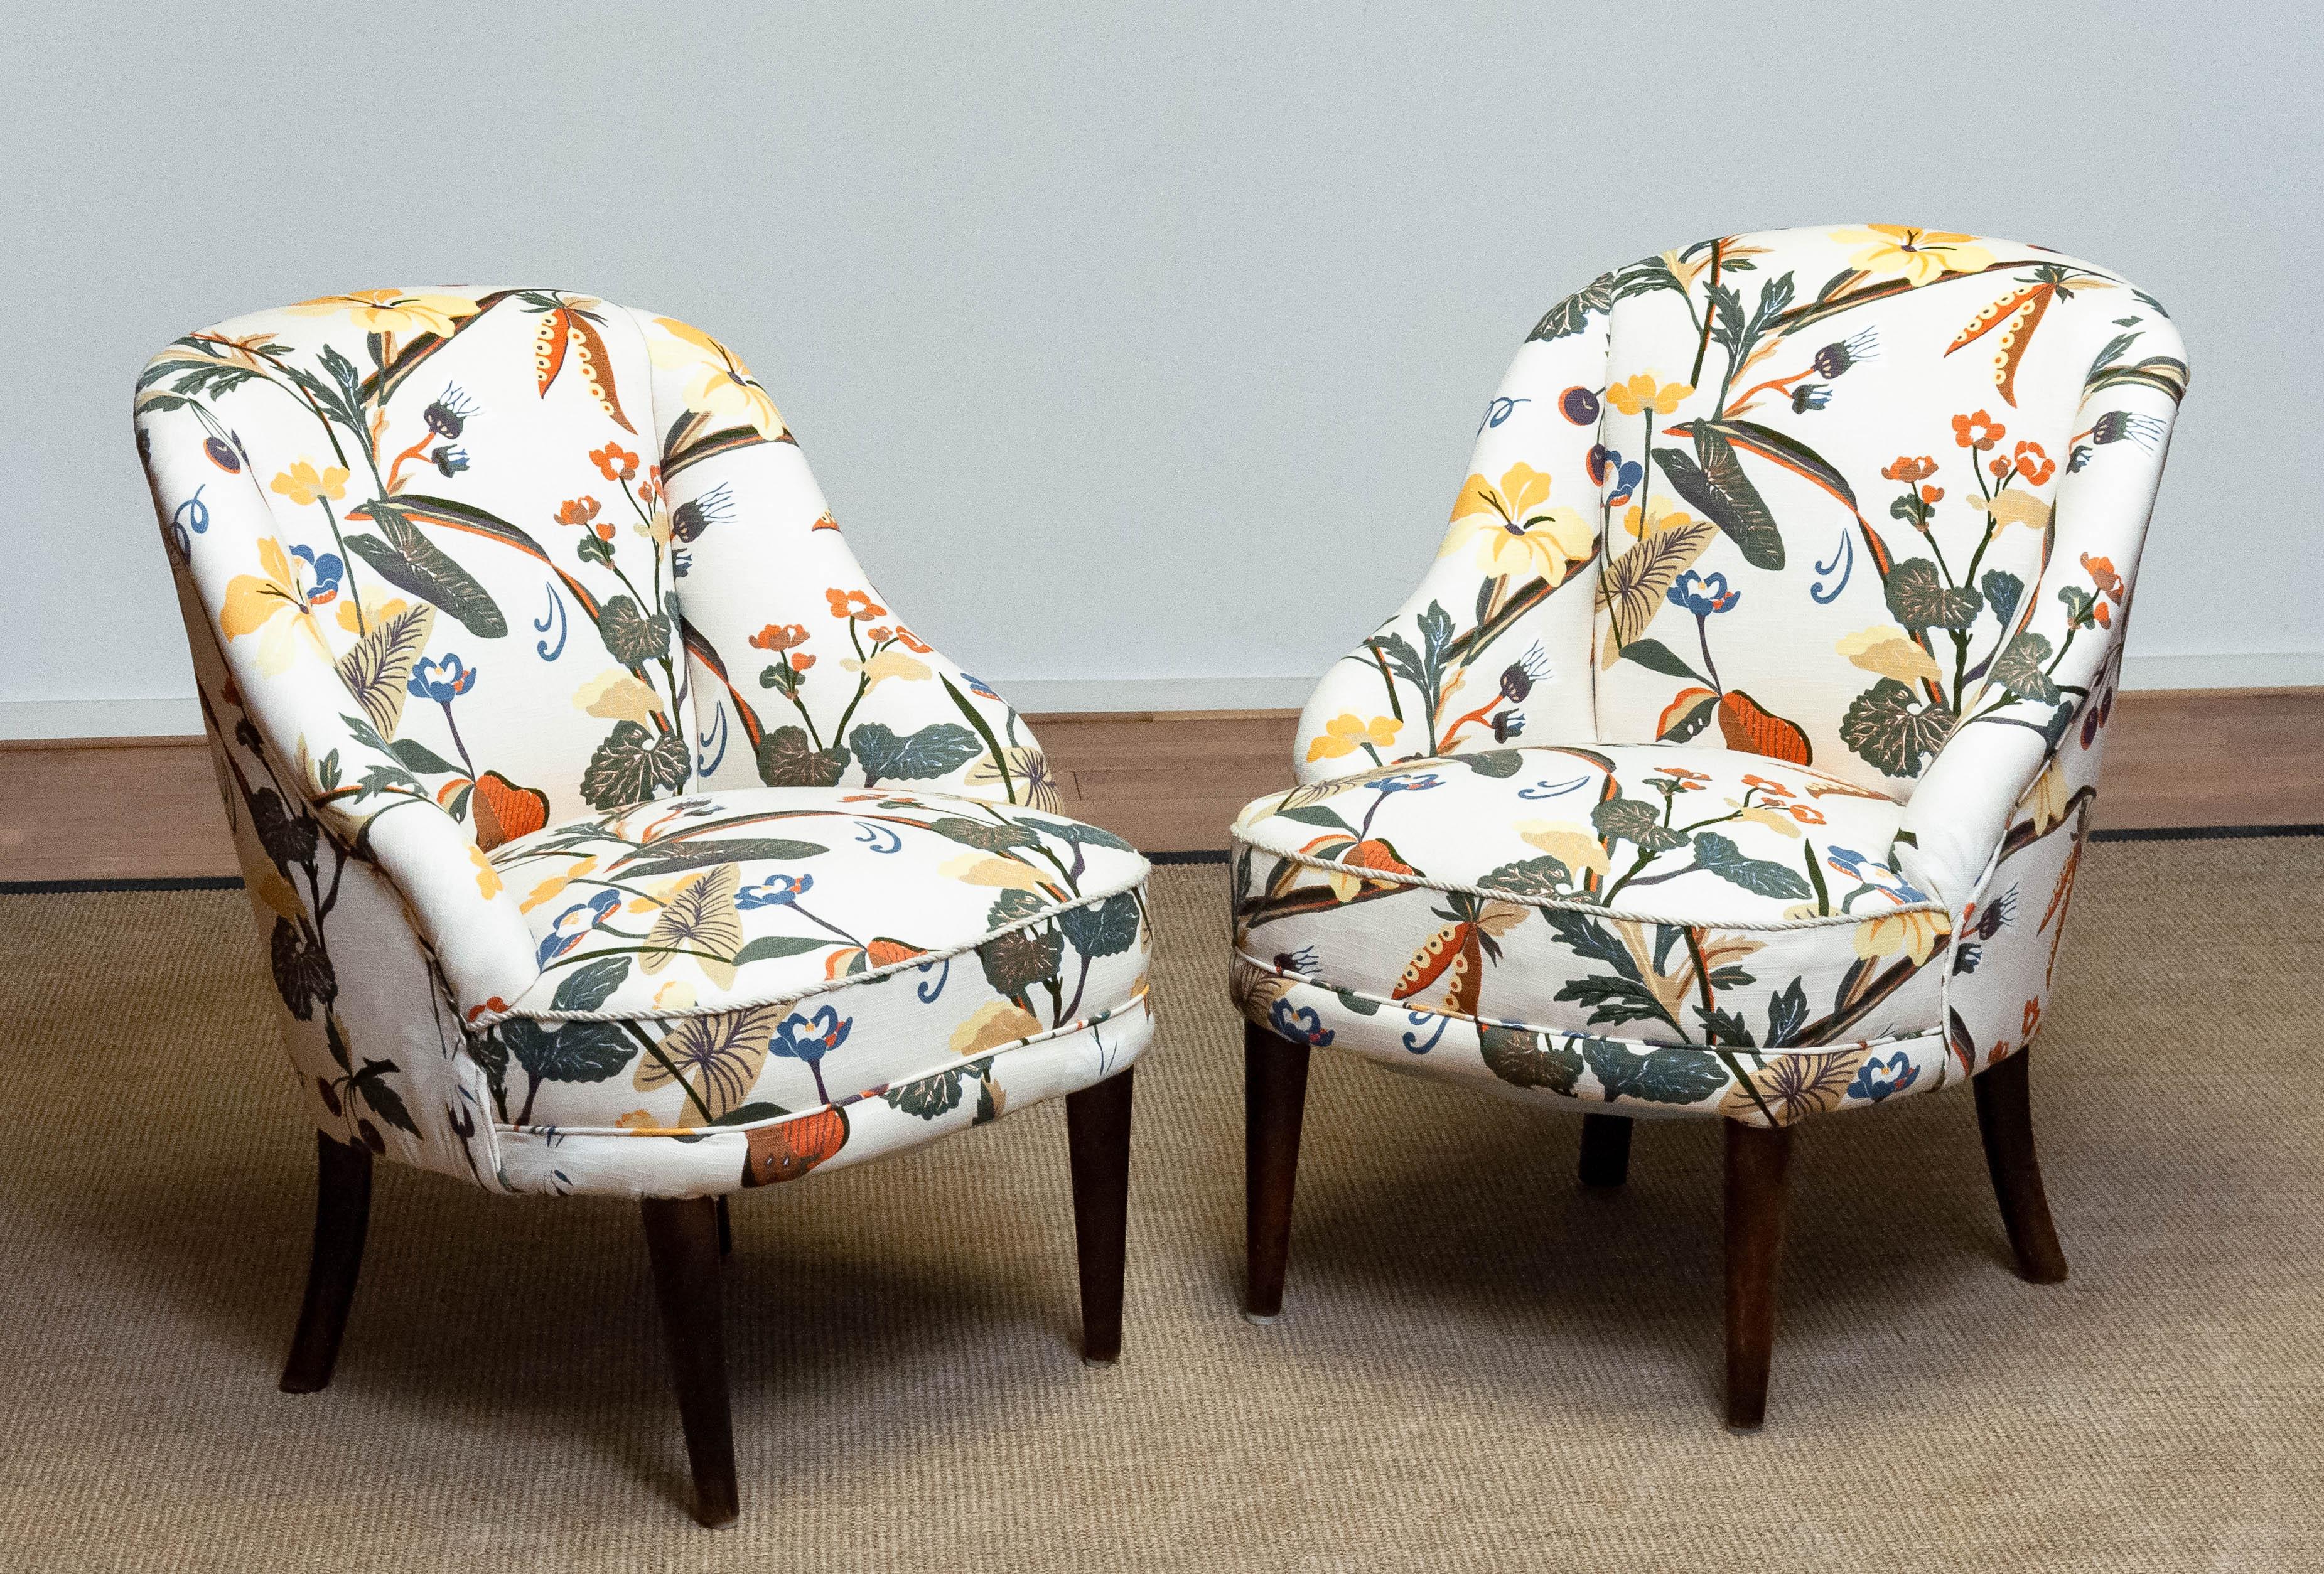 Beautiful pair Danish slipper chairs from the 1940s both new upholstered with floral printed linen similar to the famous and bright Josef Frank fabrics. Frame and legs are made of beech and both in good condition. Hand-tied springs and webbing are